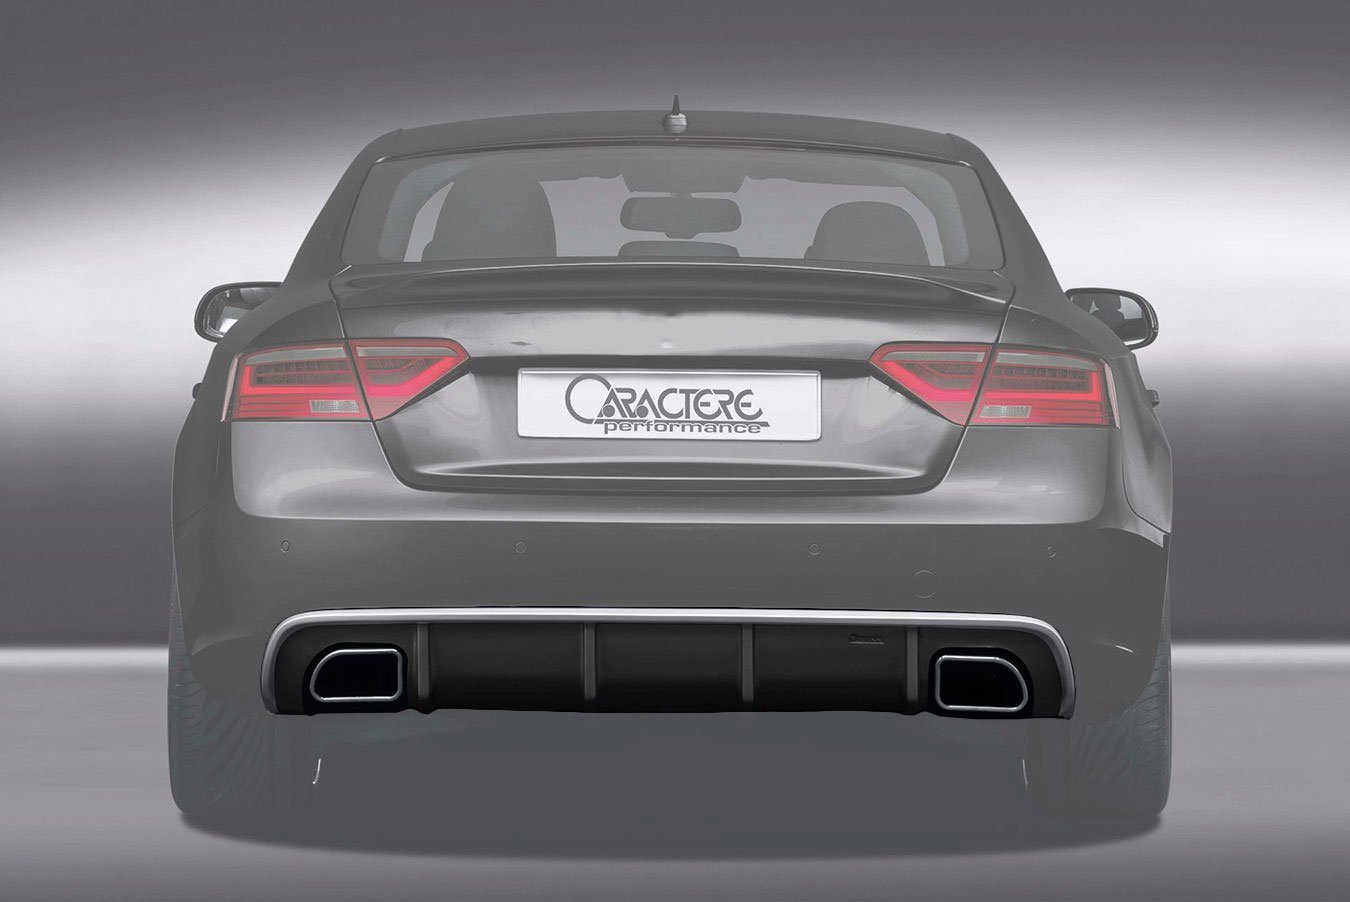 Caractere Rear Diffuser With Dual Exhaust Fits Audi A5 S5 B8 5 Sportback S Line 3 0 Tdi 1 8 2 0 3 0 Tfsi Bk Motorsport